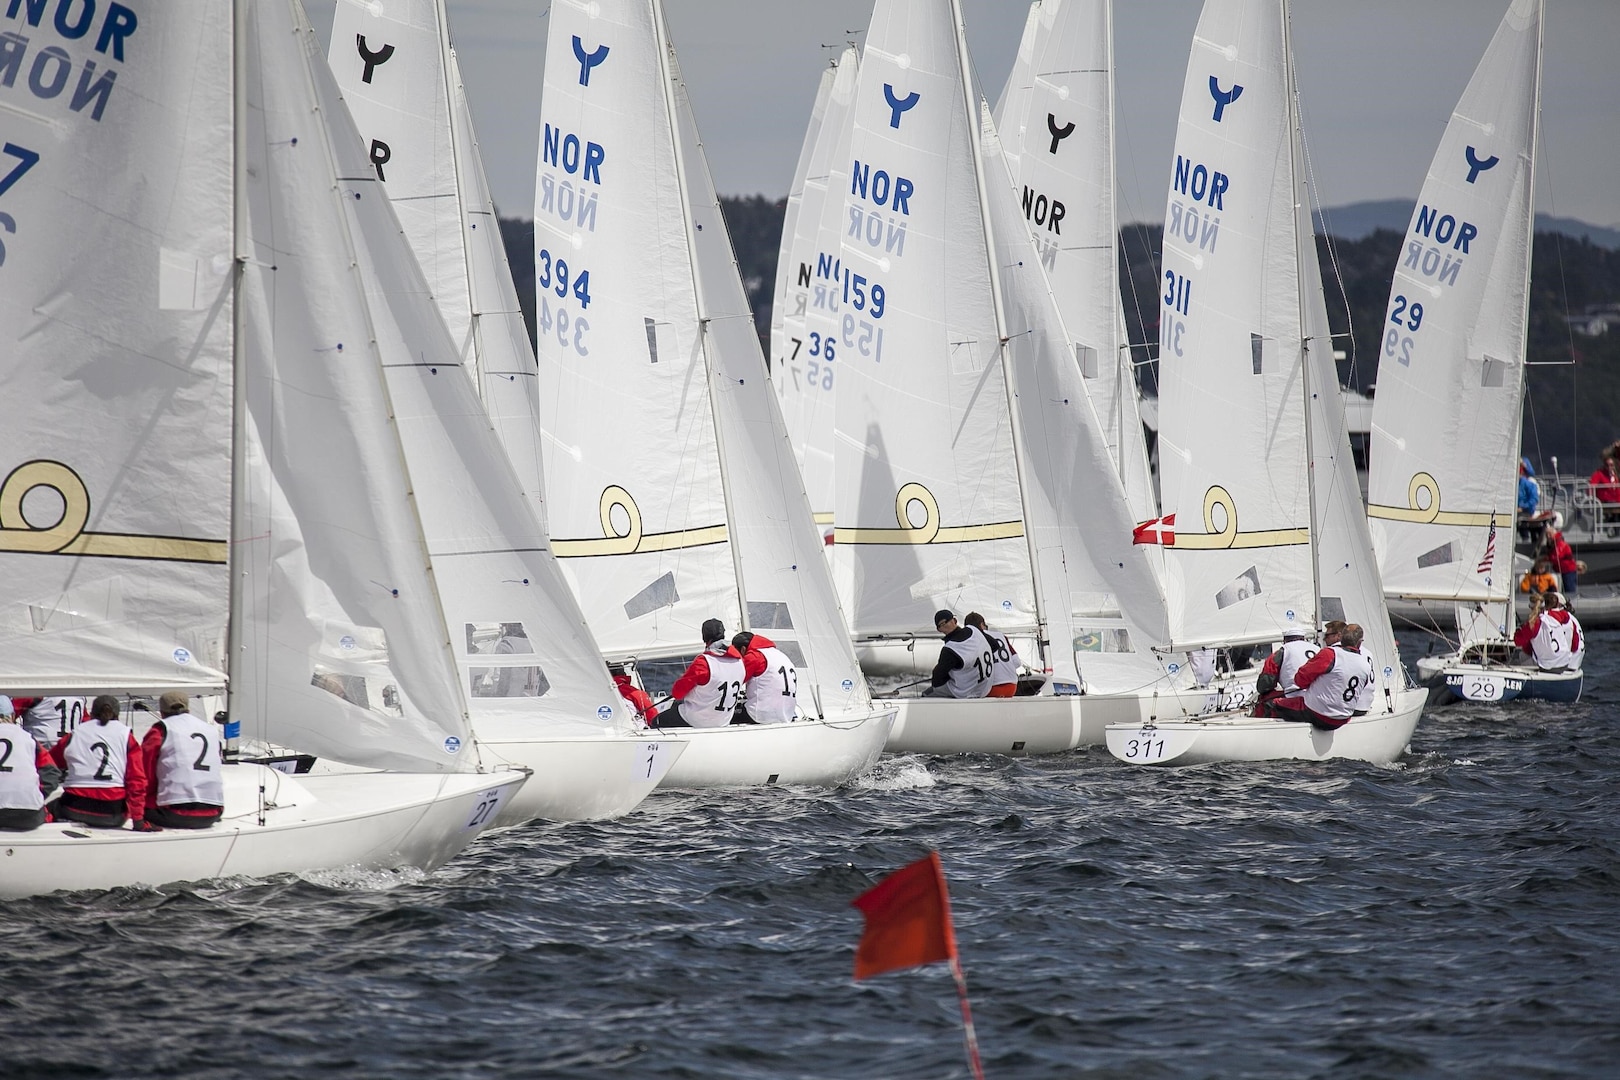 Teams line up for competition during day three of the 2013 CISM World Military Sailing Championship at the Askøy Yacht Club in Bergen, Norway